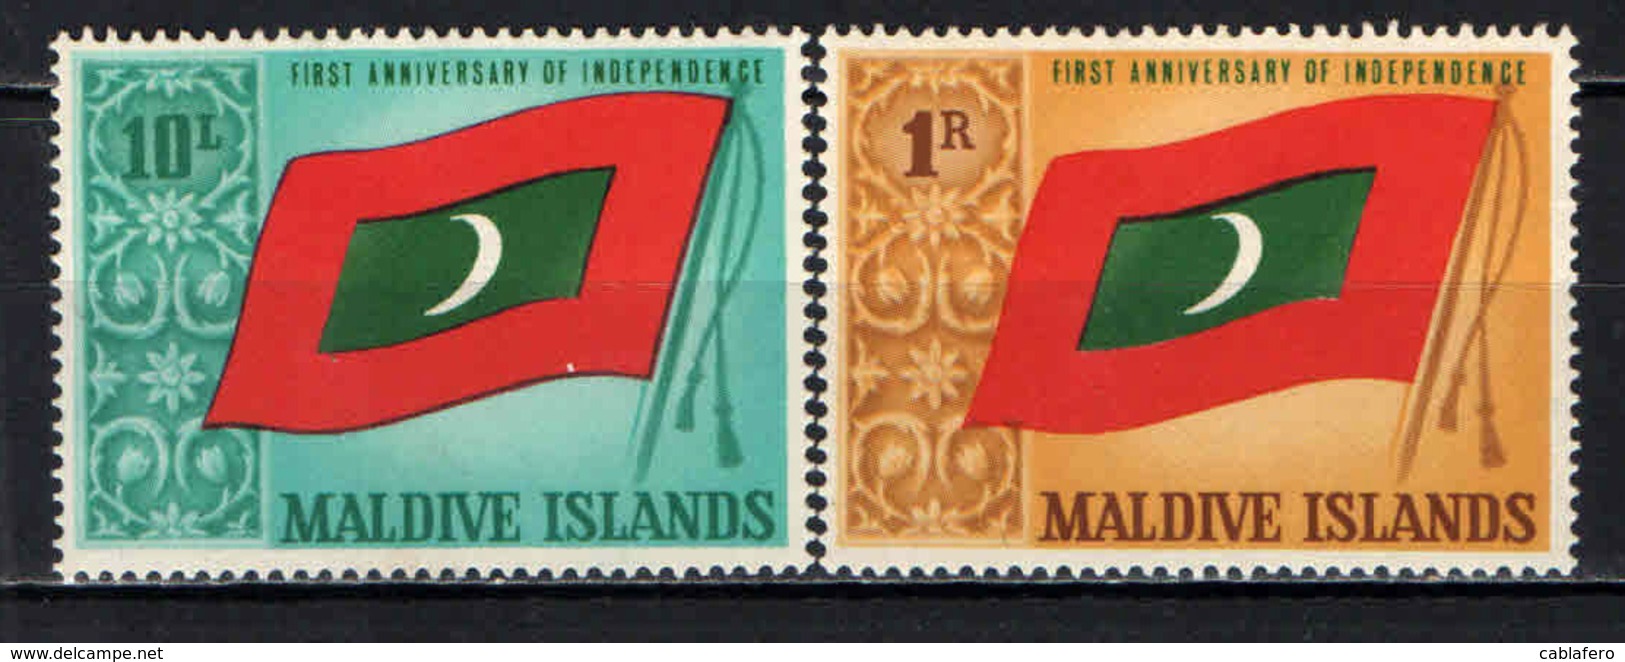 MALDIVE - 1966 - 1st Anniv. Of Full Independence From Great Britain - MNH - Maldive (1965-...)